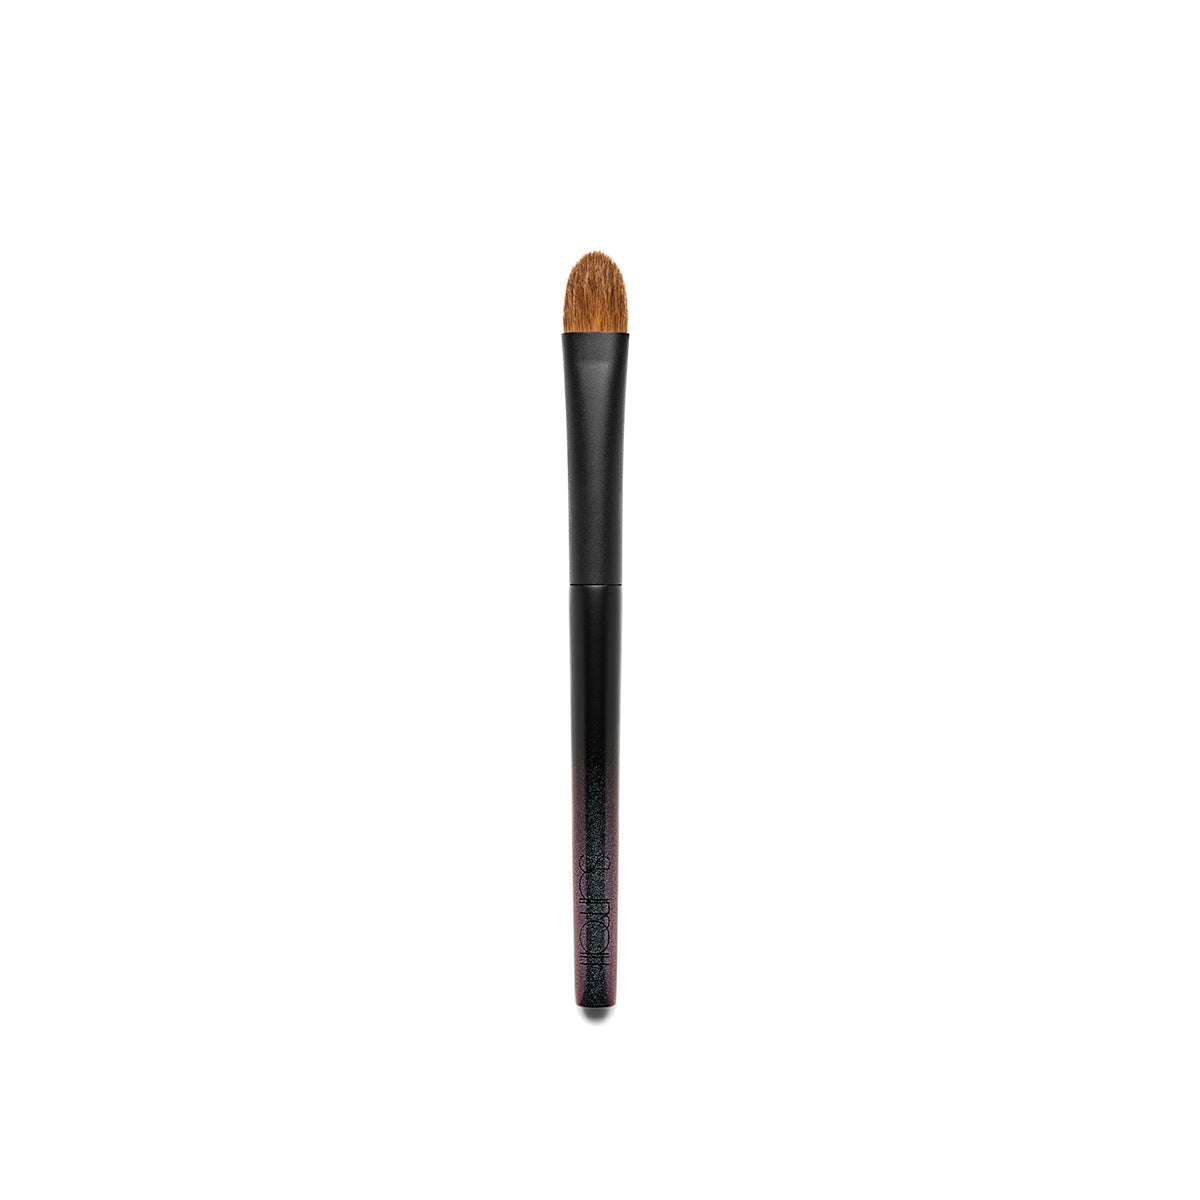 ultra-soft natural hair makeup brush for foundation and concealer